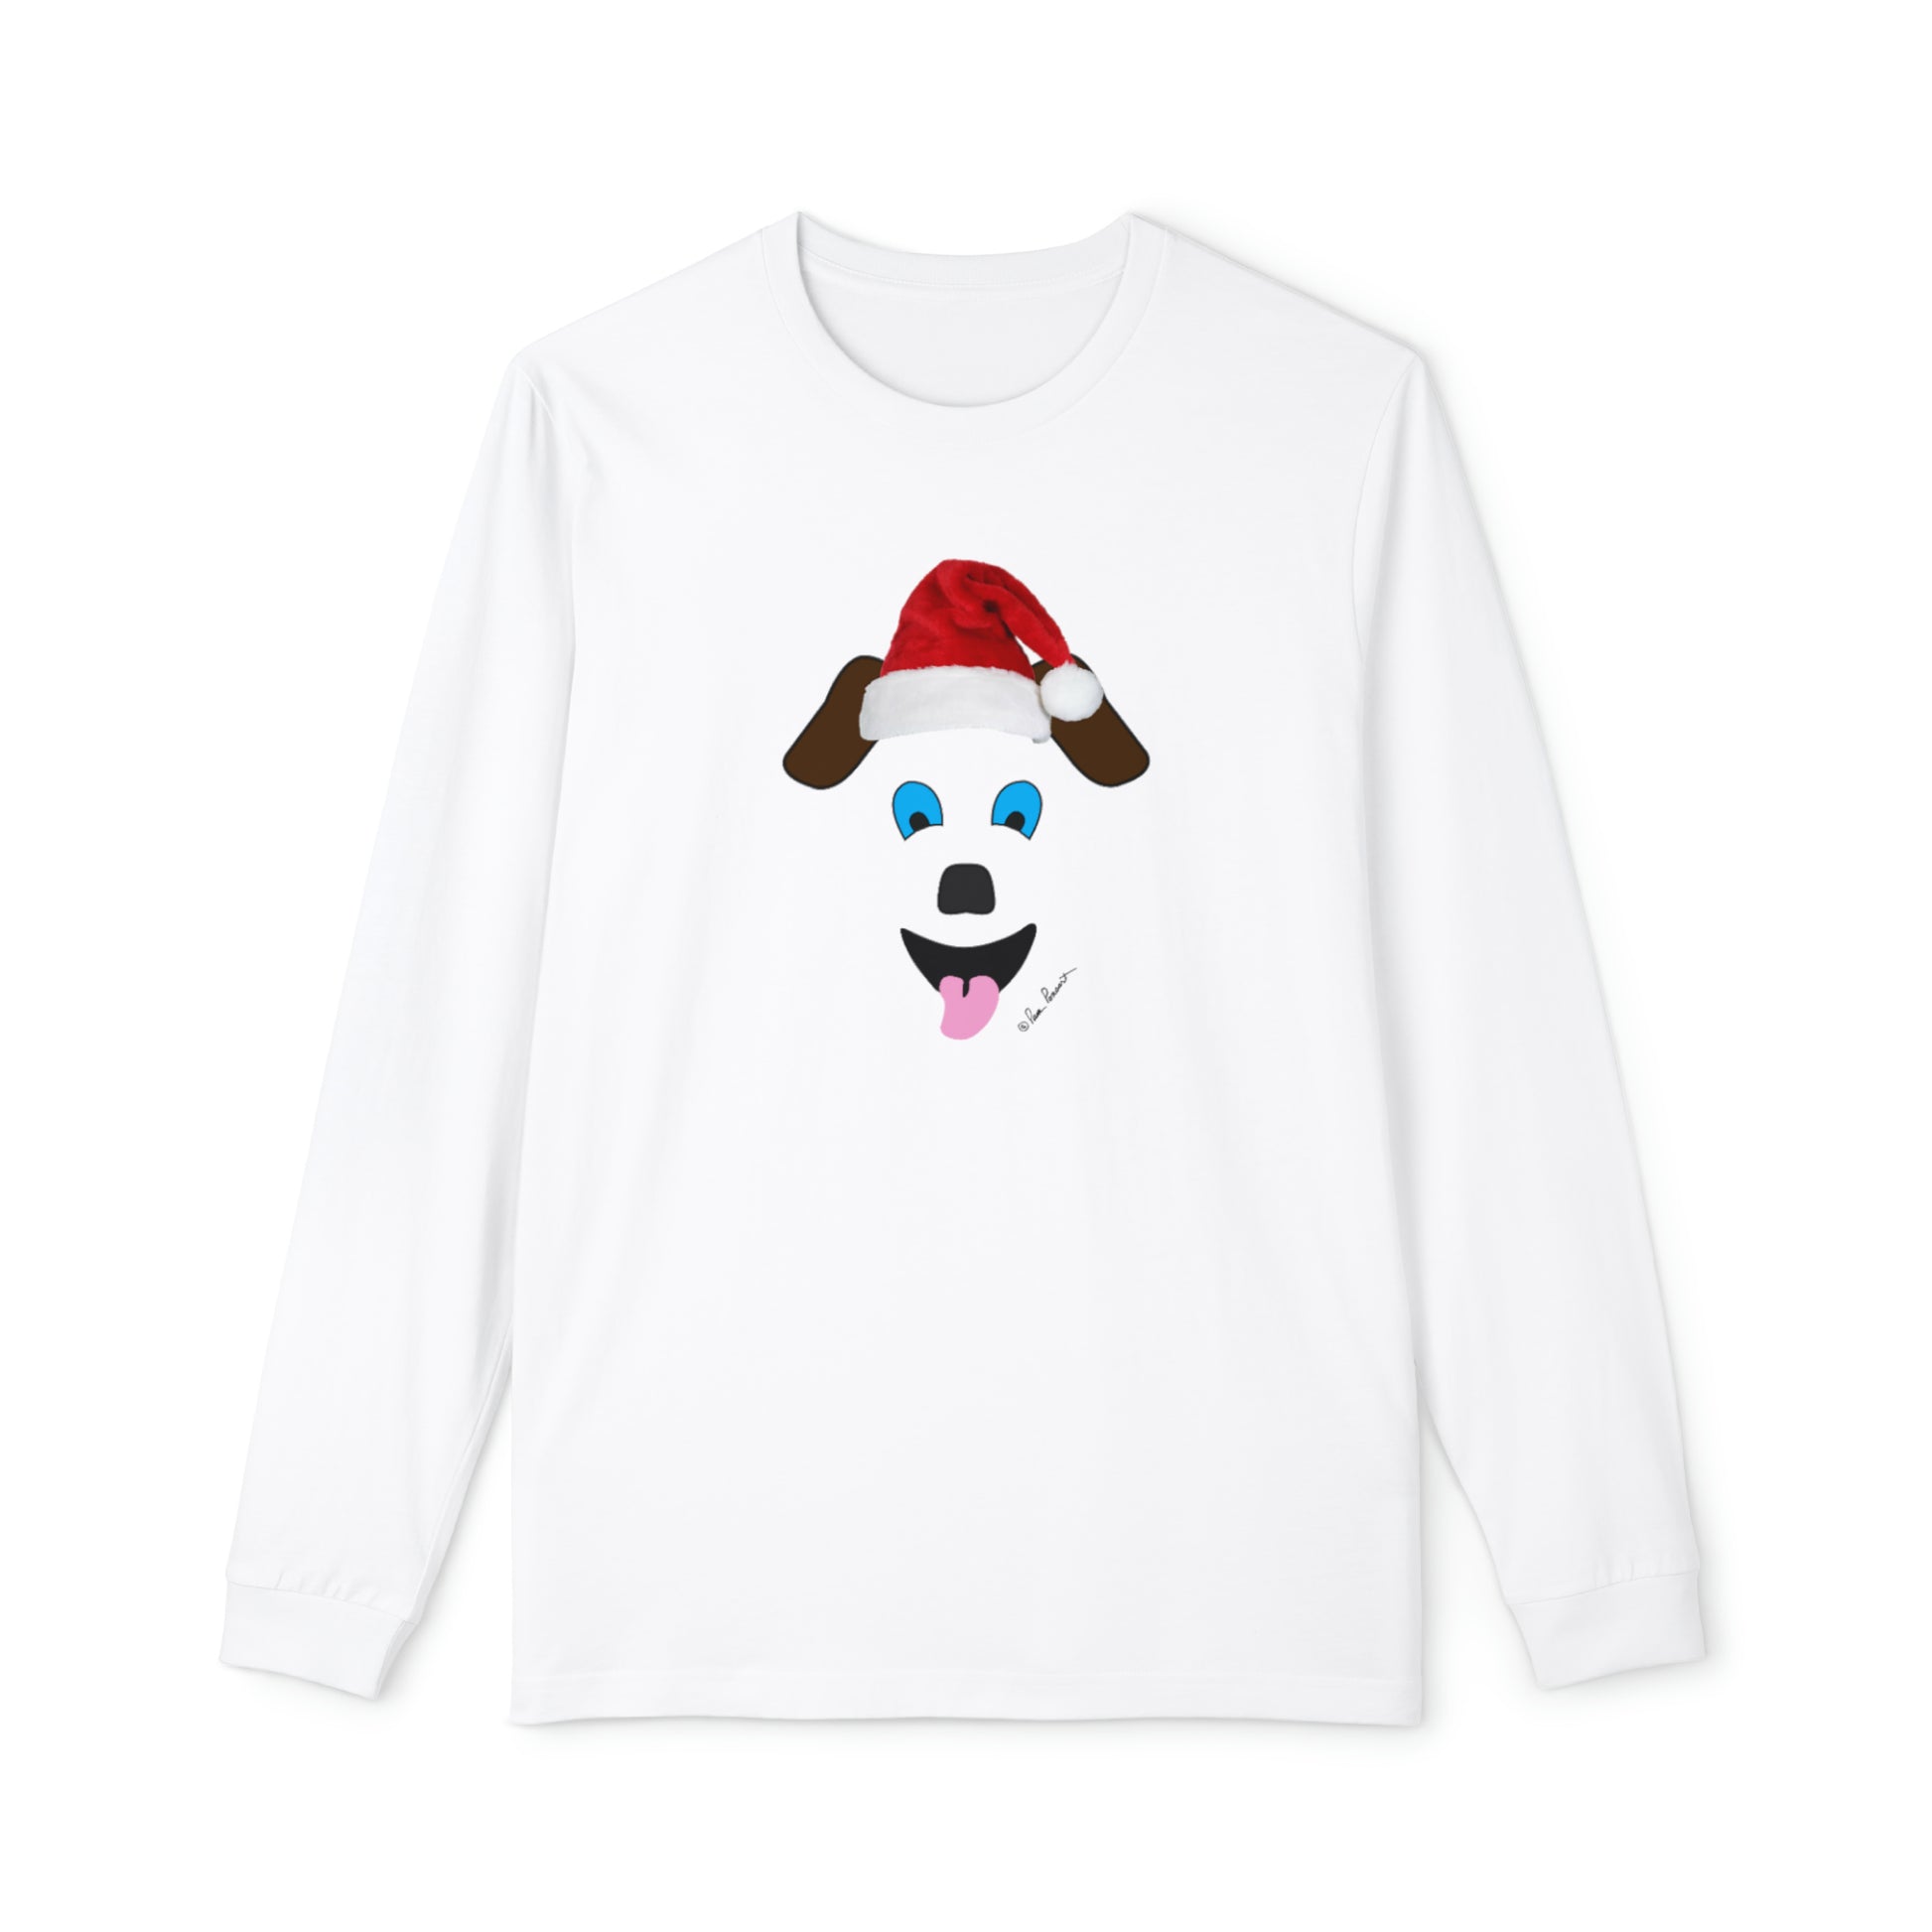 A custom-made Printify white long-sleeve pajama set featuring a dog in a Santa hat. Made of 100% cotton, perfect for women's loungewear attire.